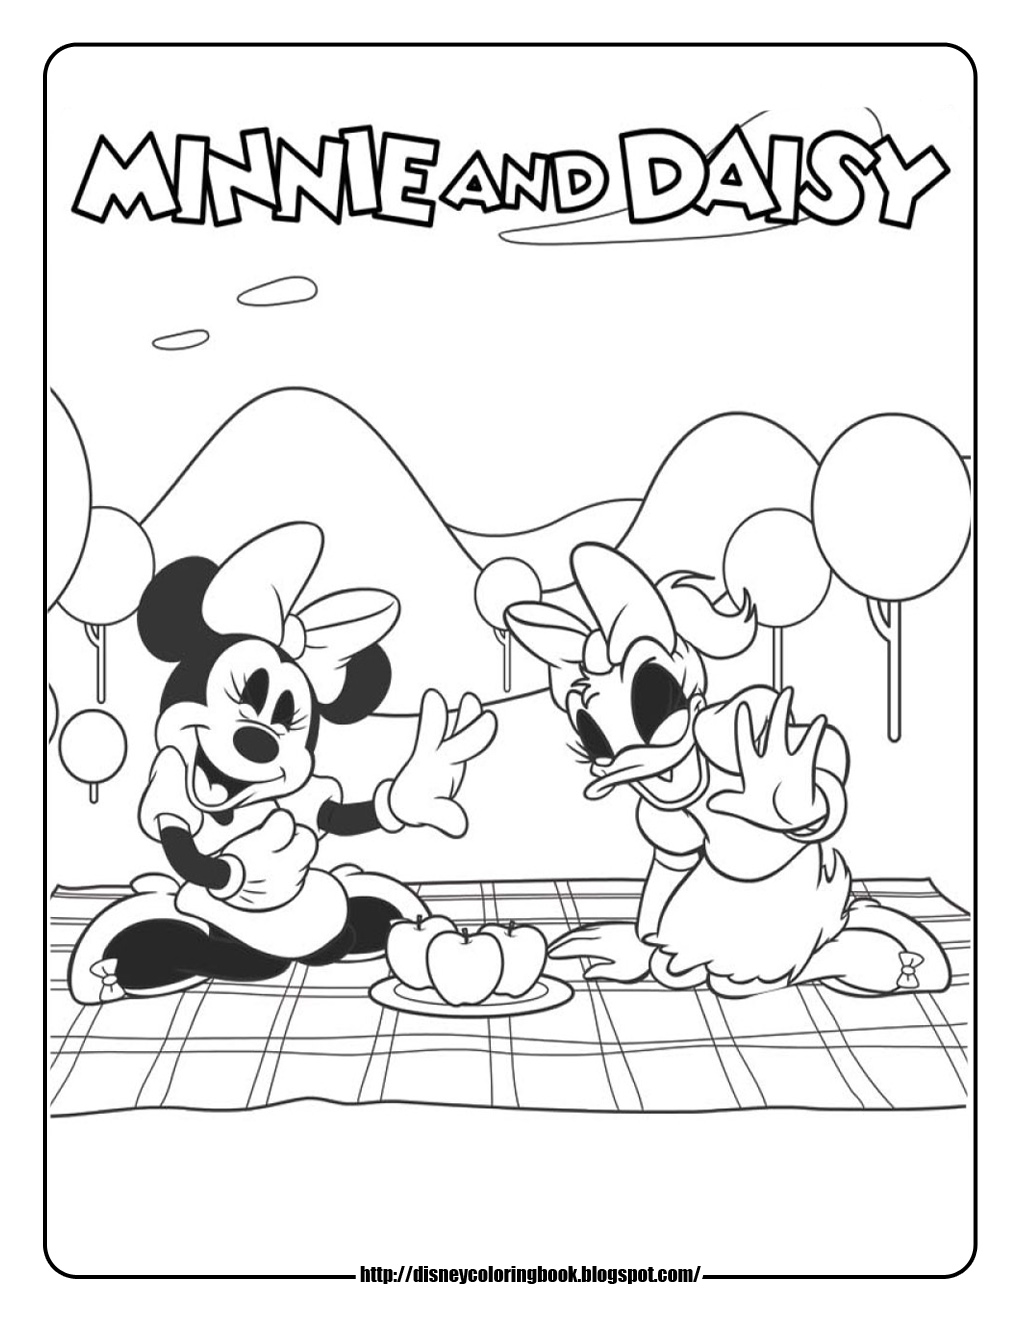 Disney coloring pages and sheets for kids mickey mouse clubhouse free disney coloring sheets